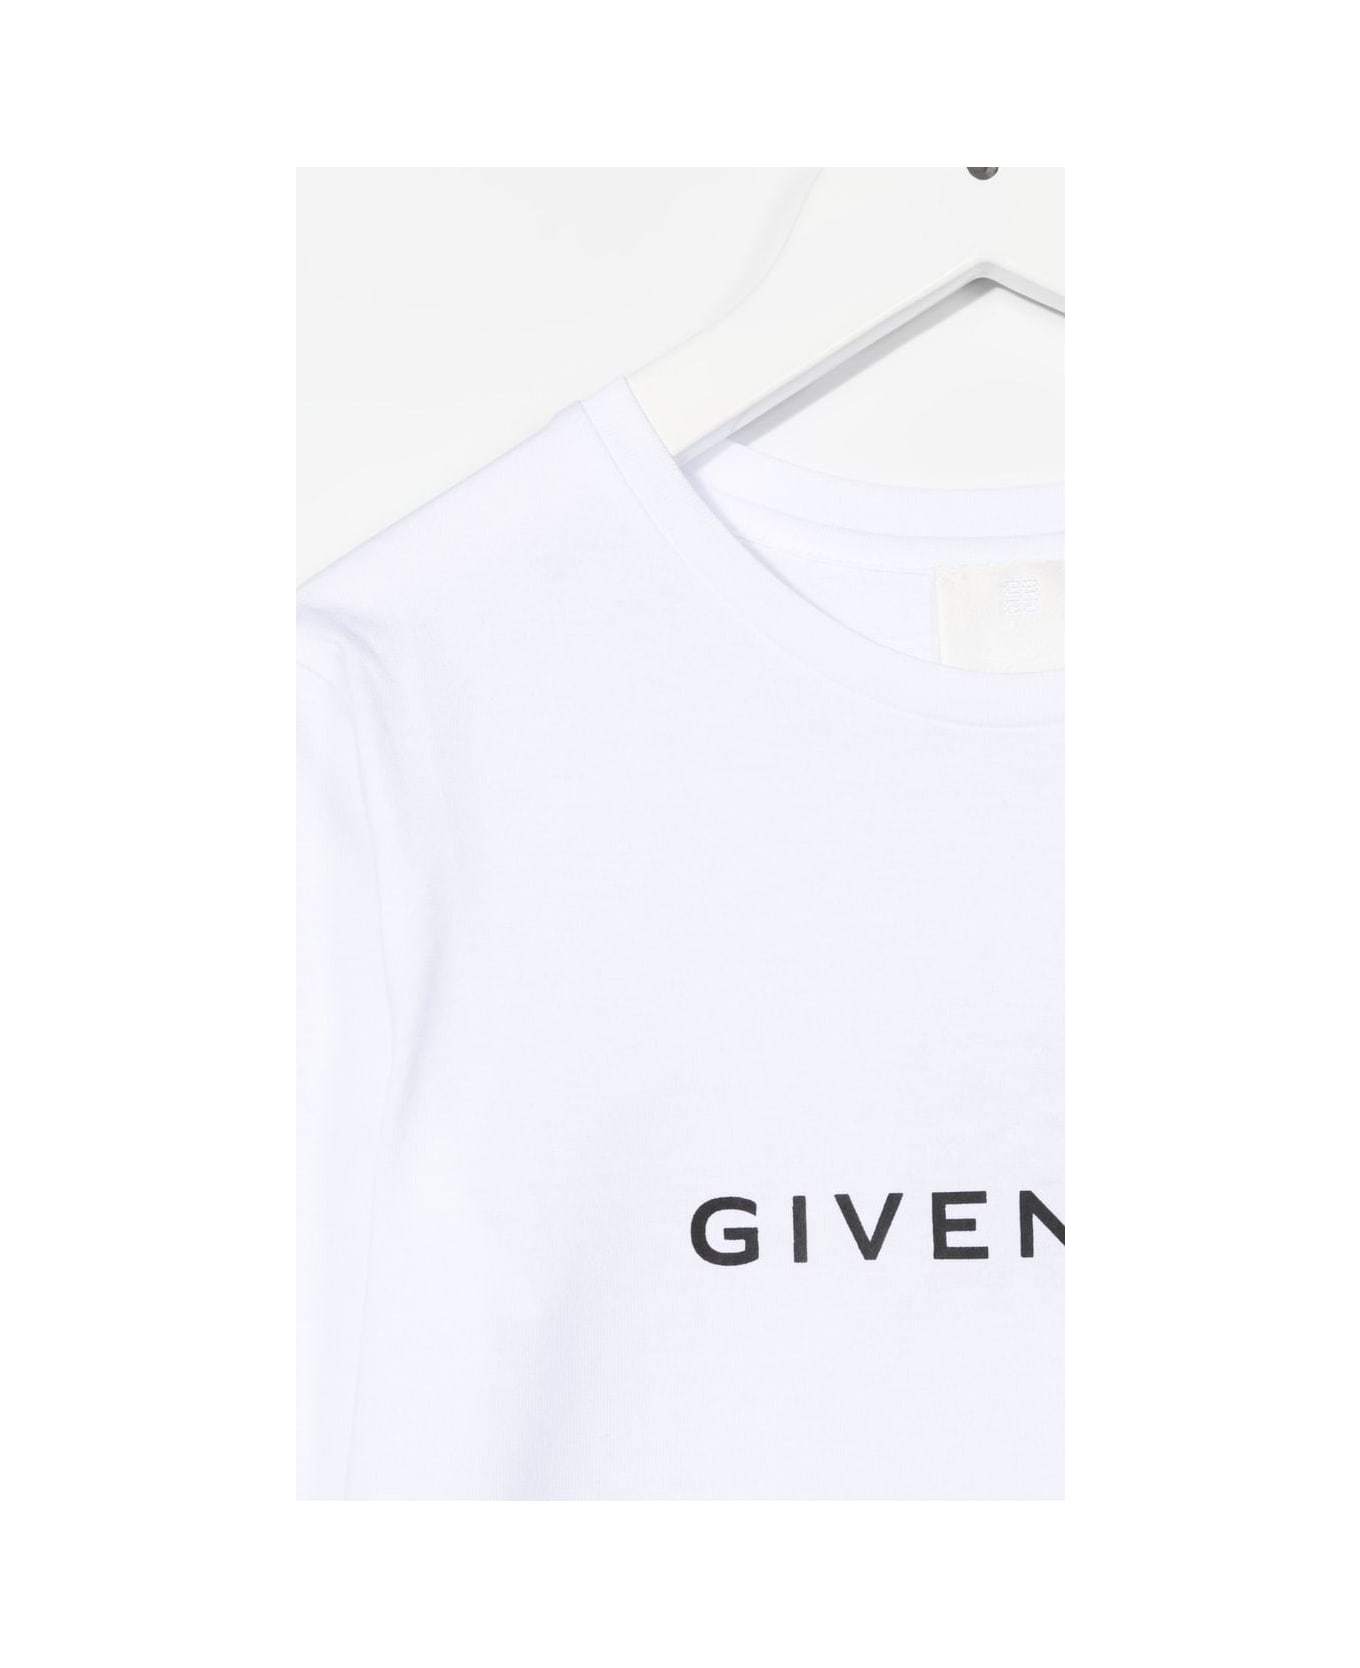 Givenchy Kids White Long Sleeve T-shirt With Signature And Logo - WHITE Tシャツ＆ポロシャツ